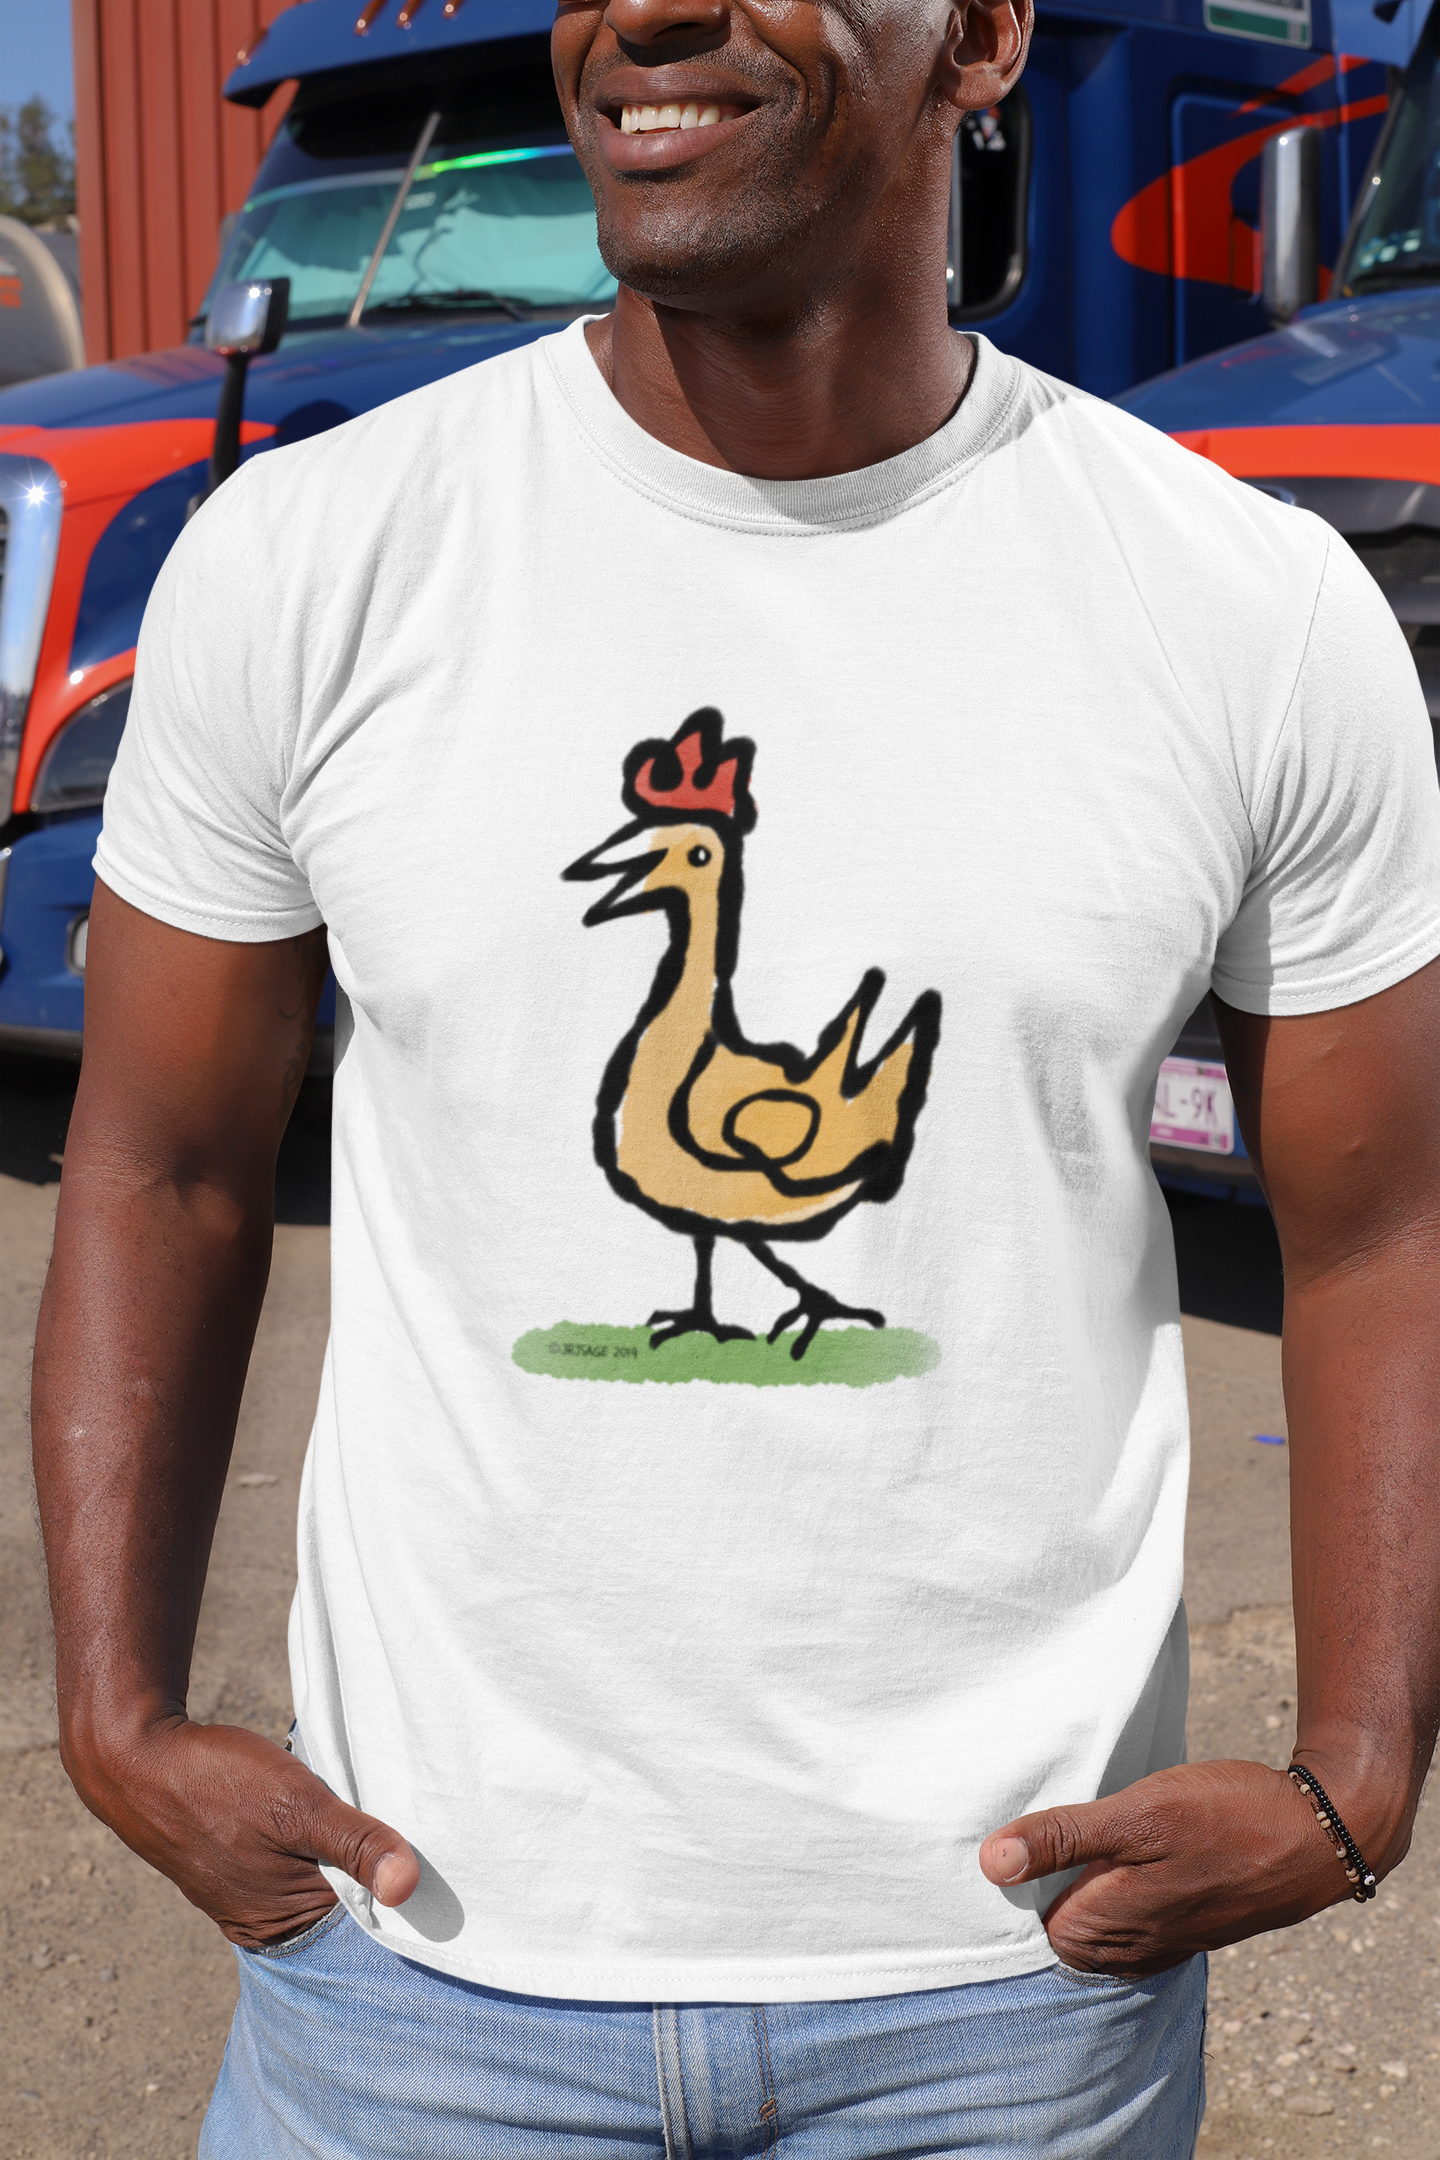 Happy Chicken T-shirt - Young man wearing Illustrated Funny Chicken design on a white vegan cotton t-shirt by Hector and Bone